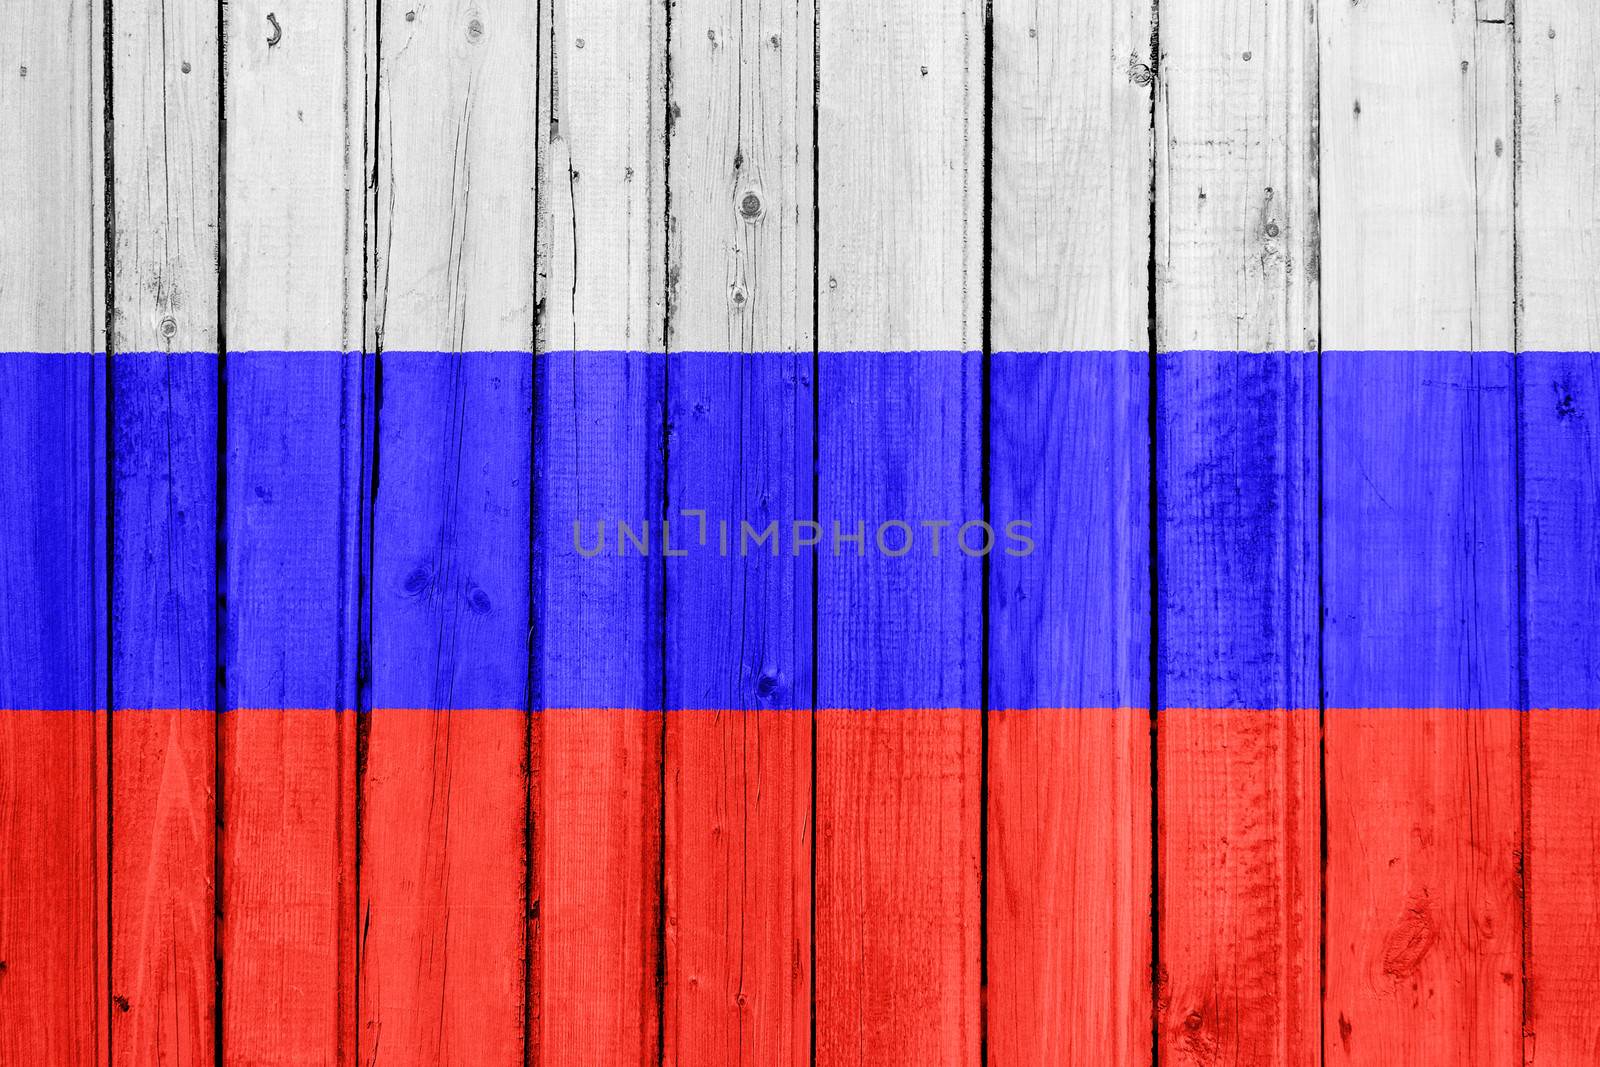 The Russian flag painted on a wooden fence